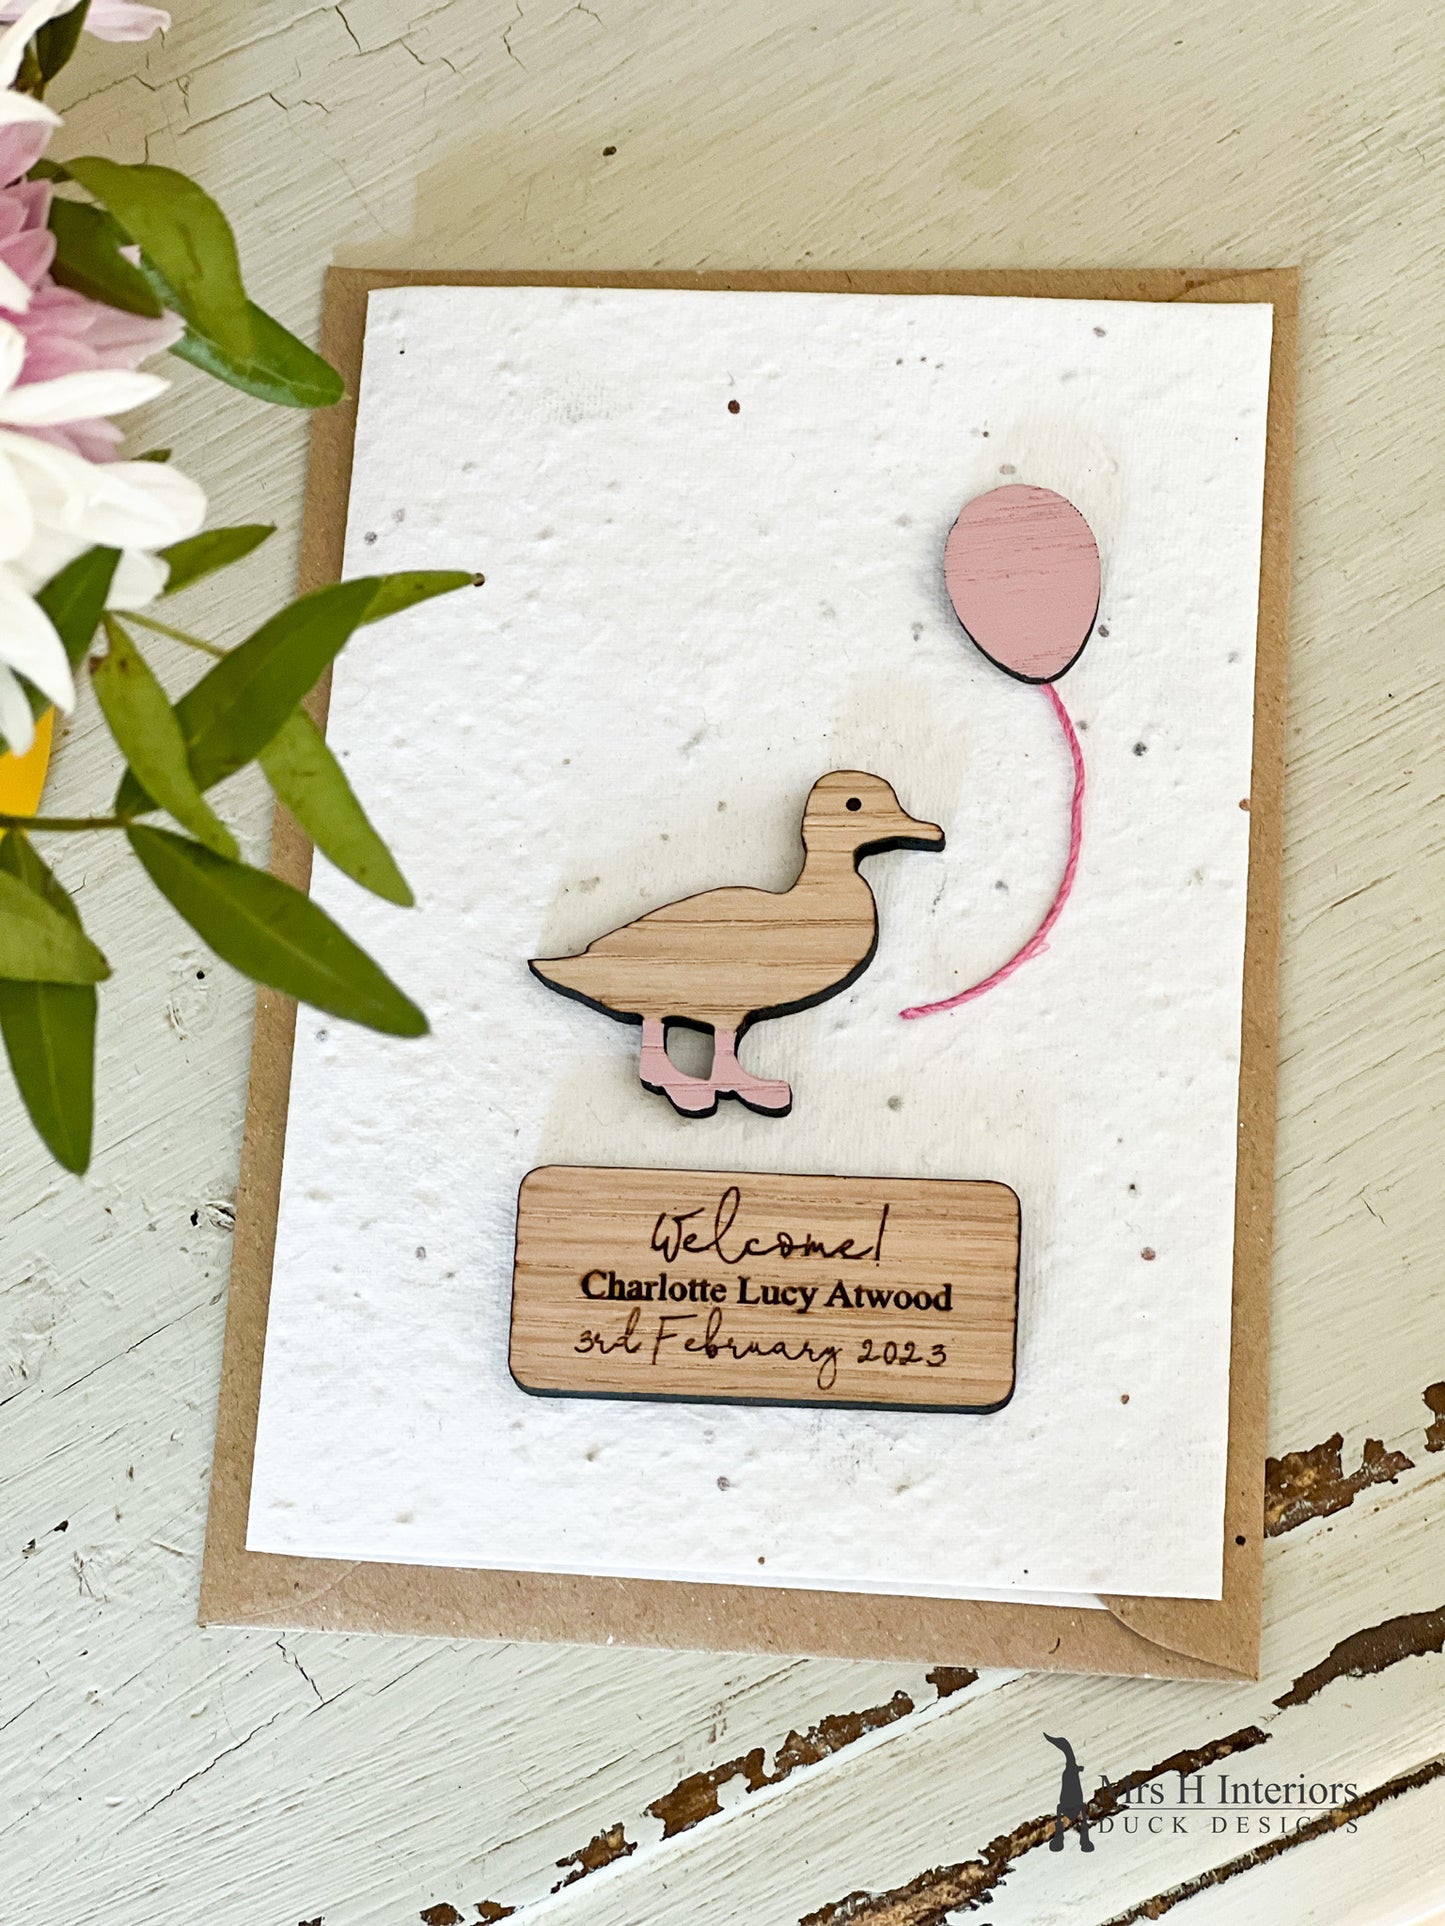 Welcome (name & date) - Duckling & Balloon - Congratulations New Baby Greetings Card - Decorated Wooden Duck in Boots by Mrs H the Duck Lady